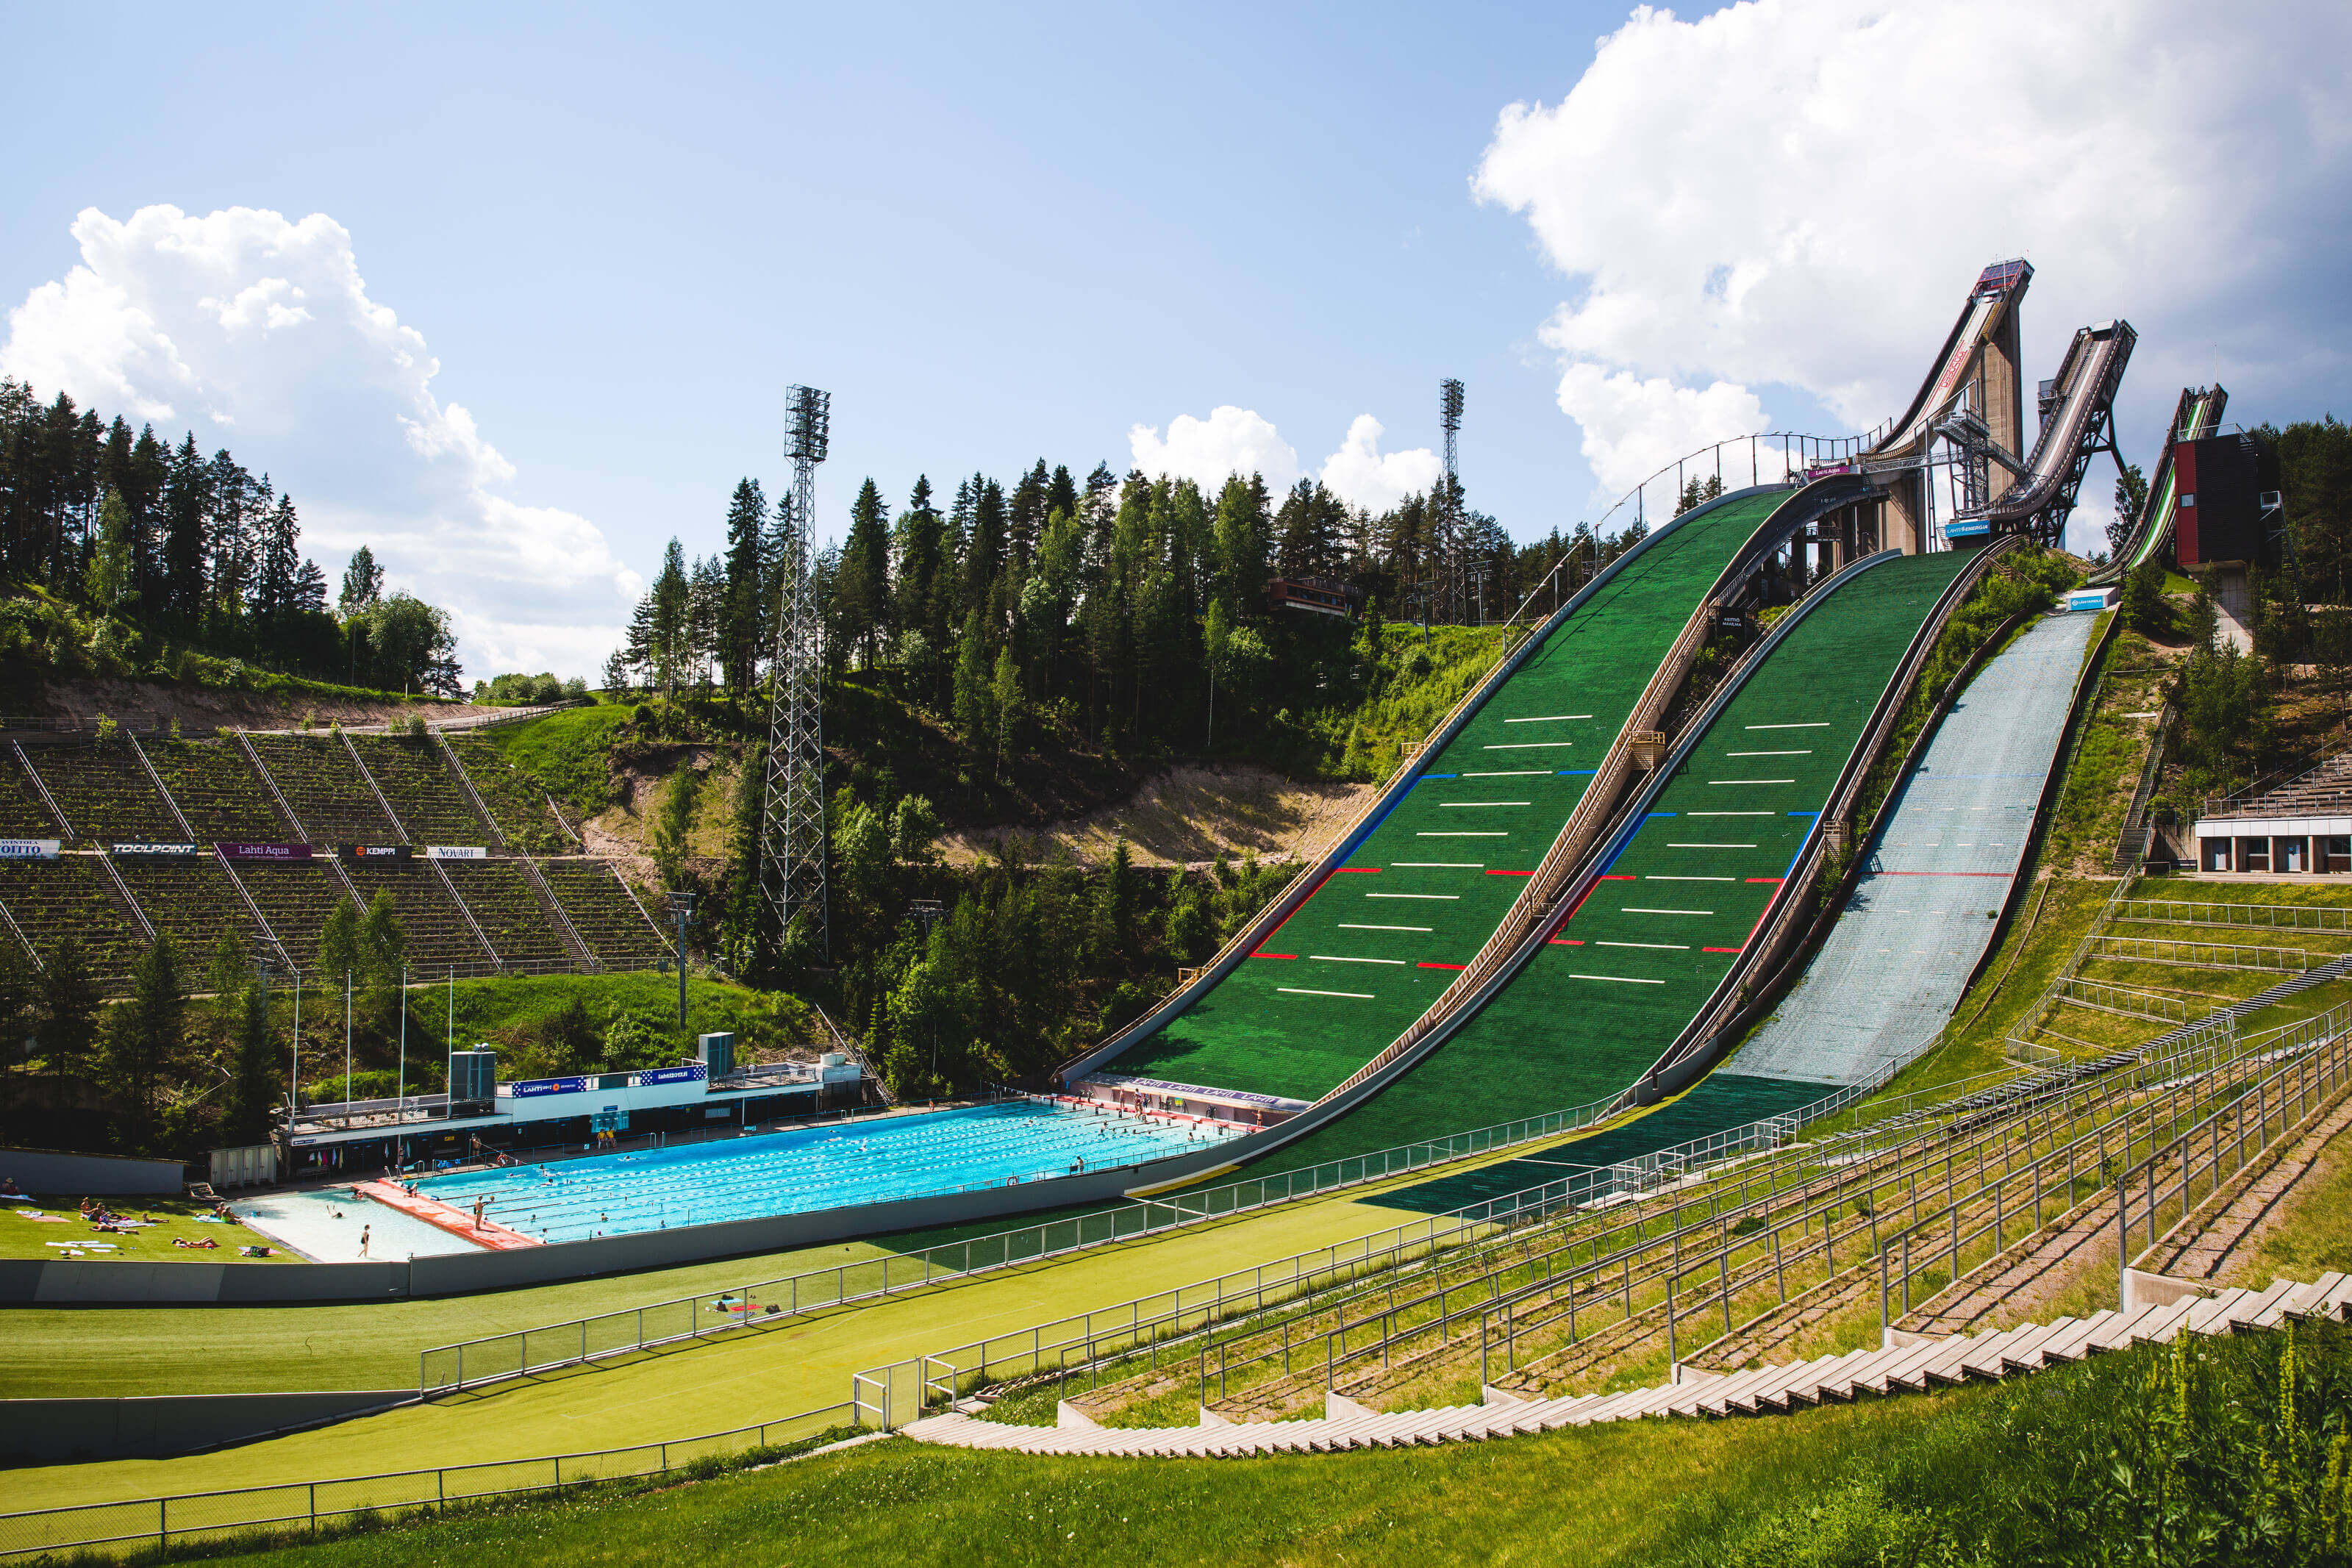 A ski jumping venue in Lahti transformed into an outdoor pool for summer.